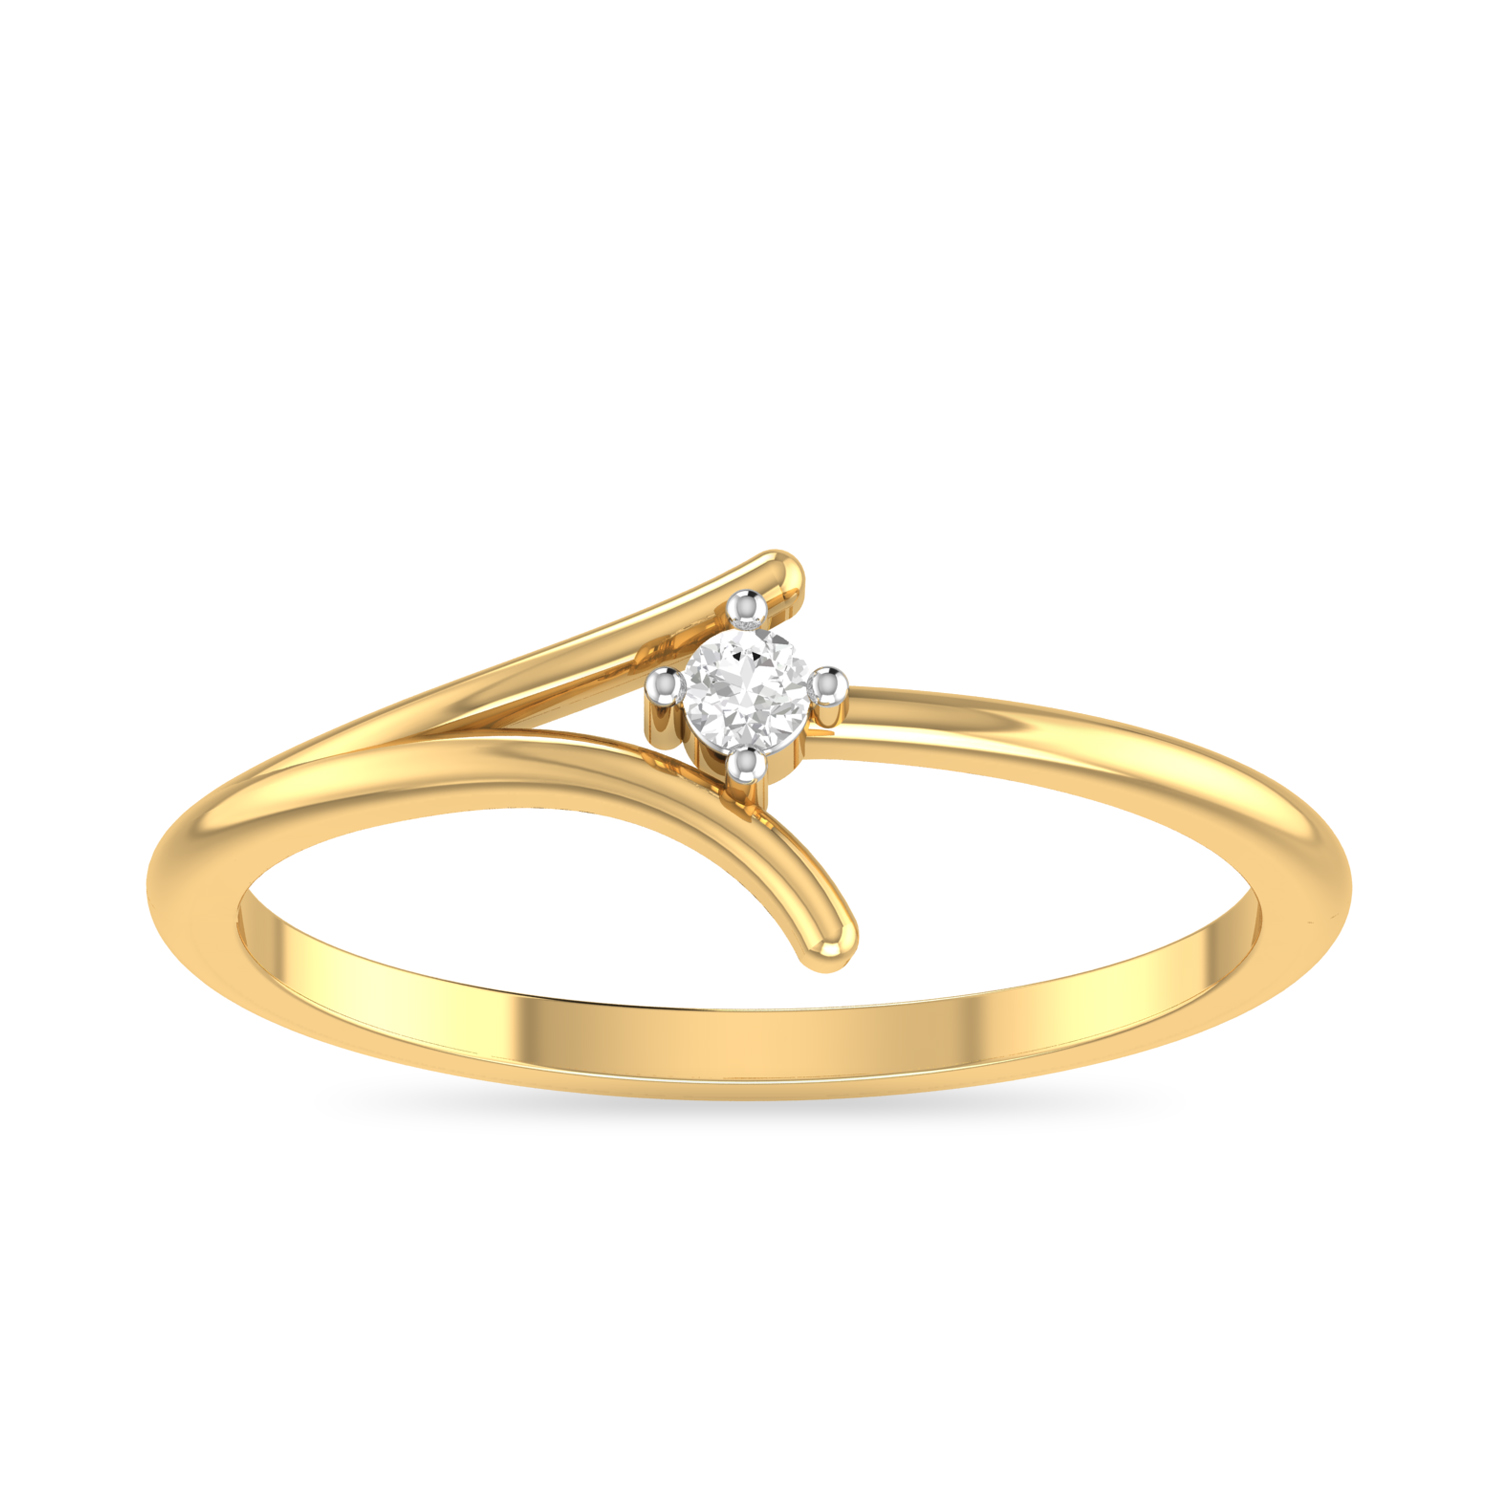 AFIVE AABI JEWELS GIE CERTIFIED NEW DESIGN  DIAMOND RING FOR WOM